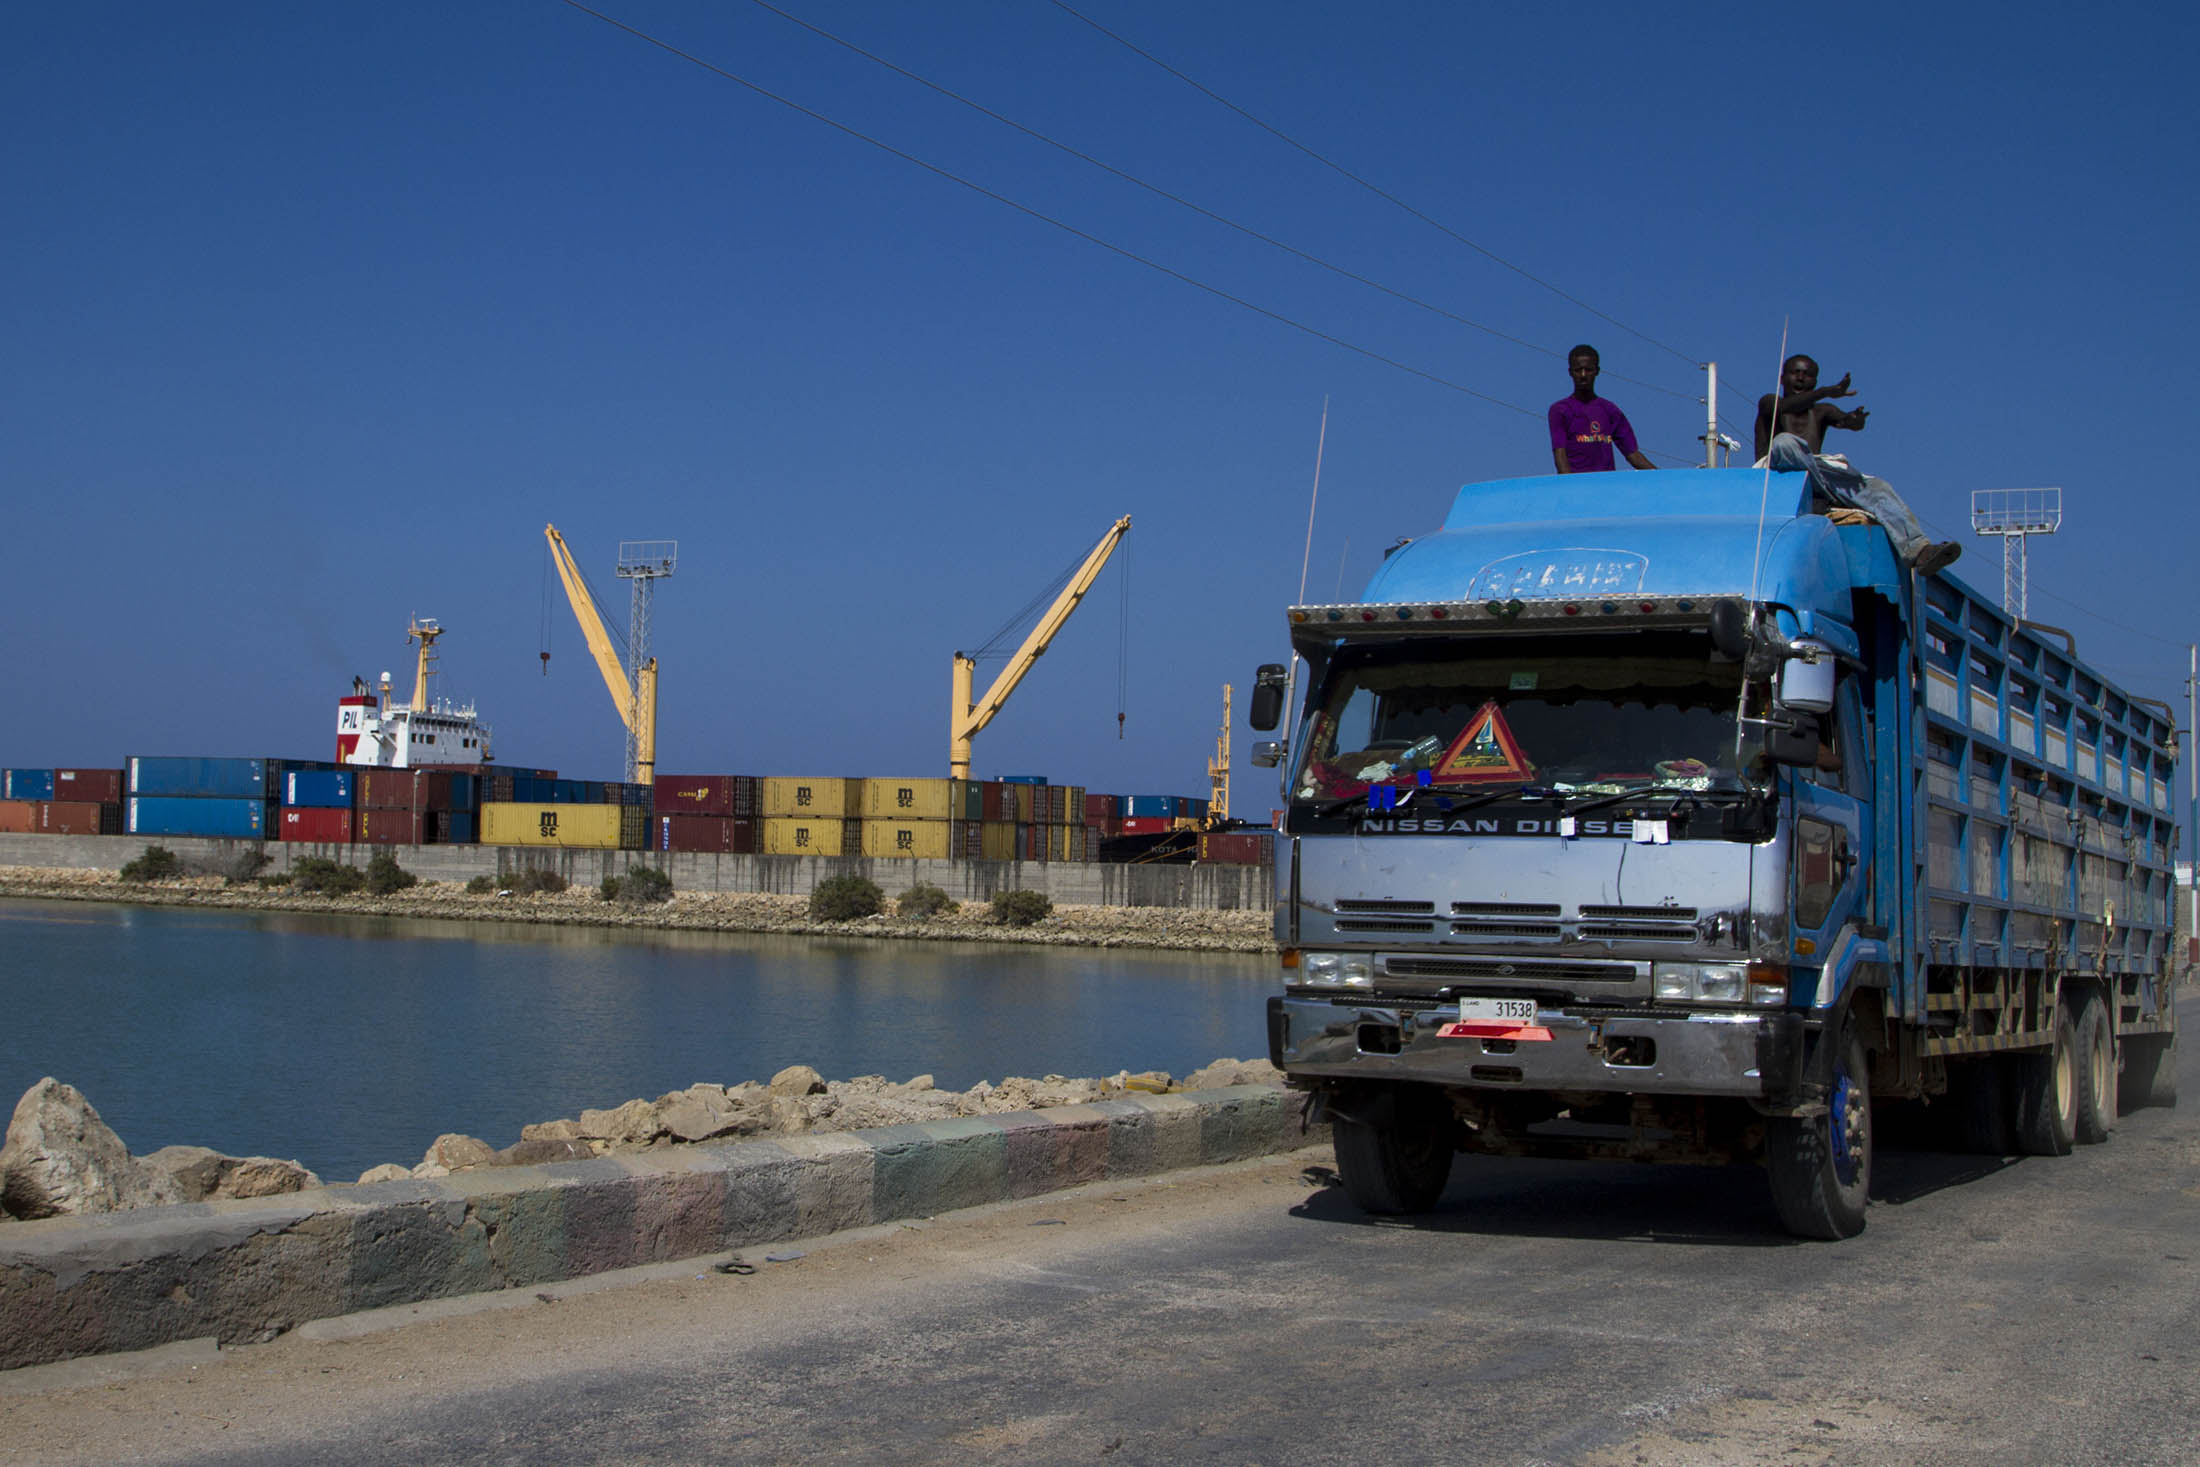 A Truck carrying cargo drives through the port of Berbera.
